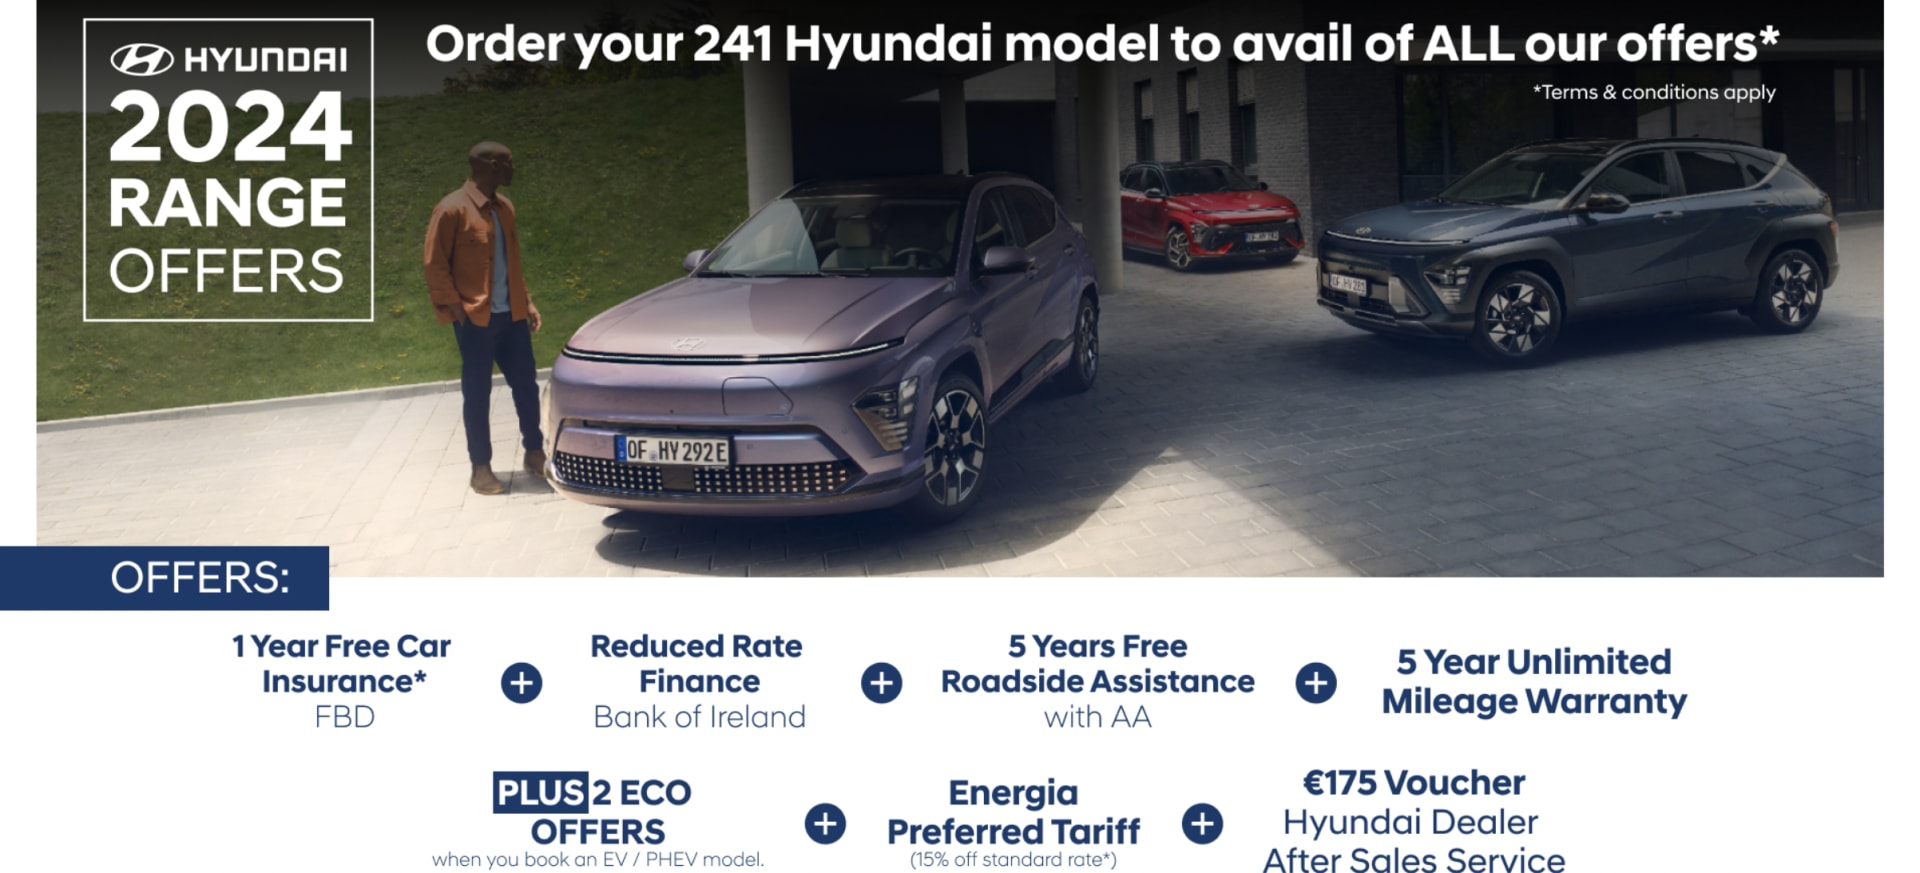 Secure Your 241 Hyundai